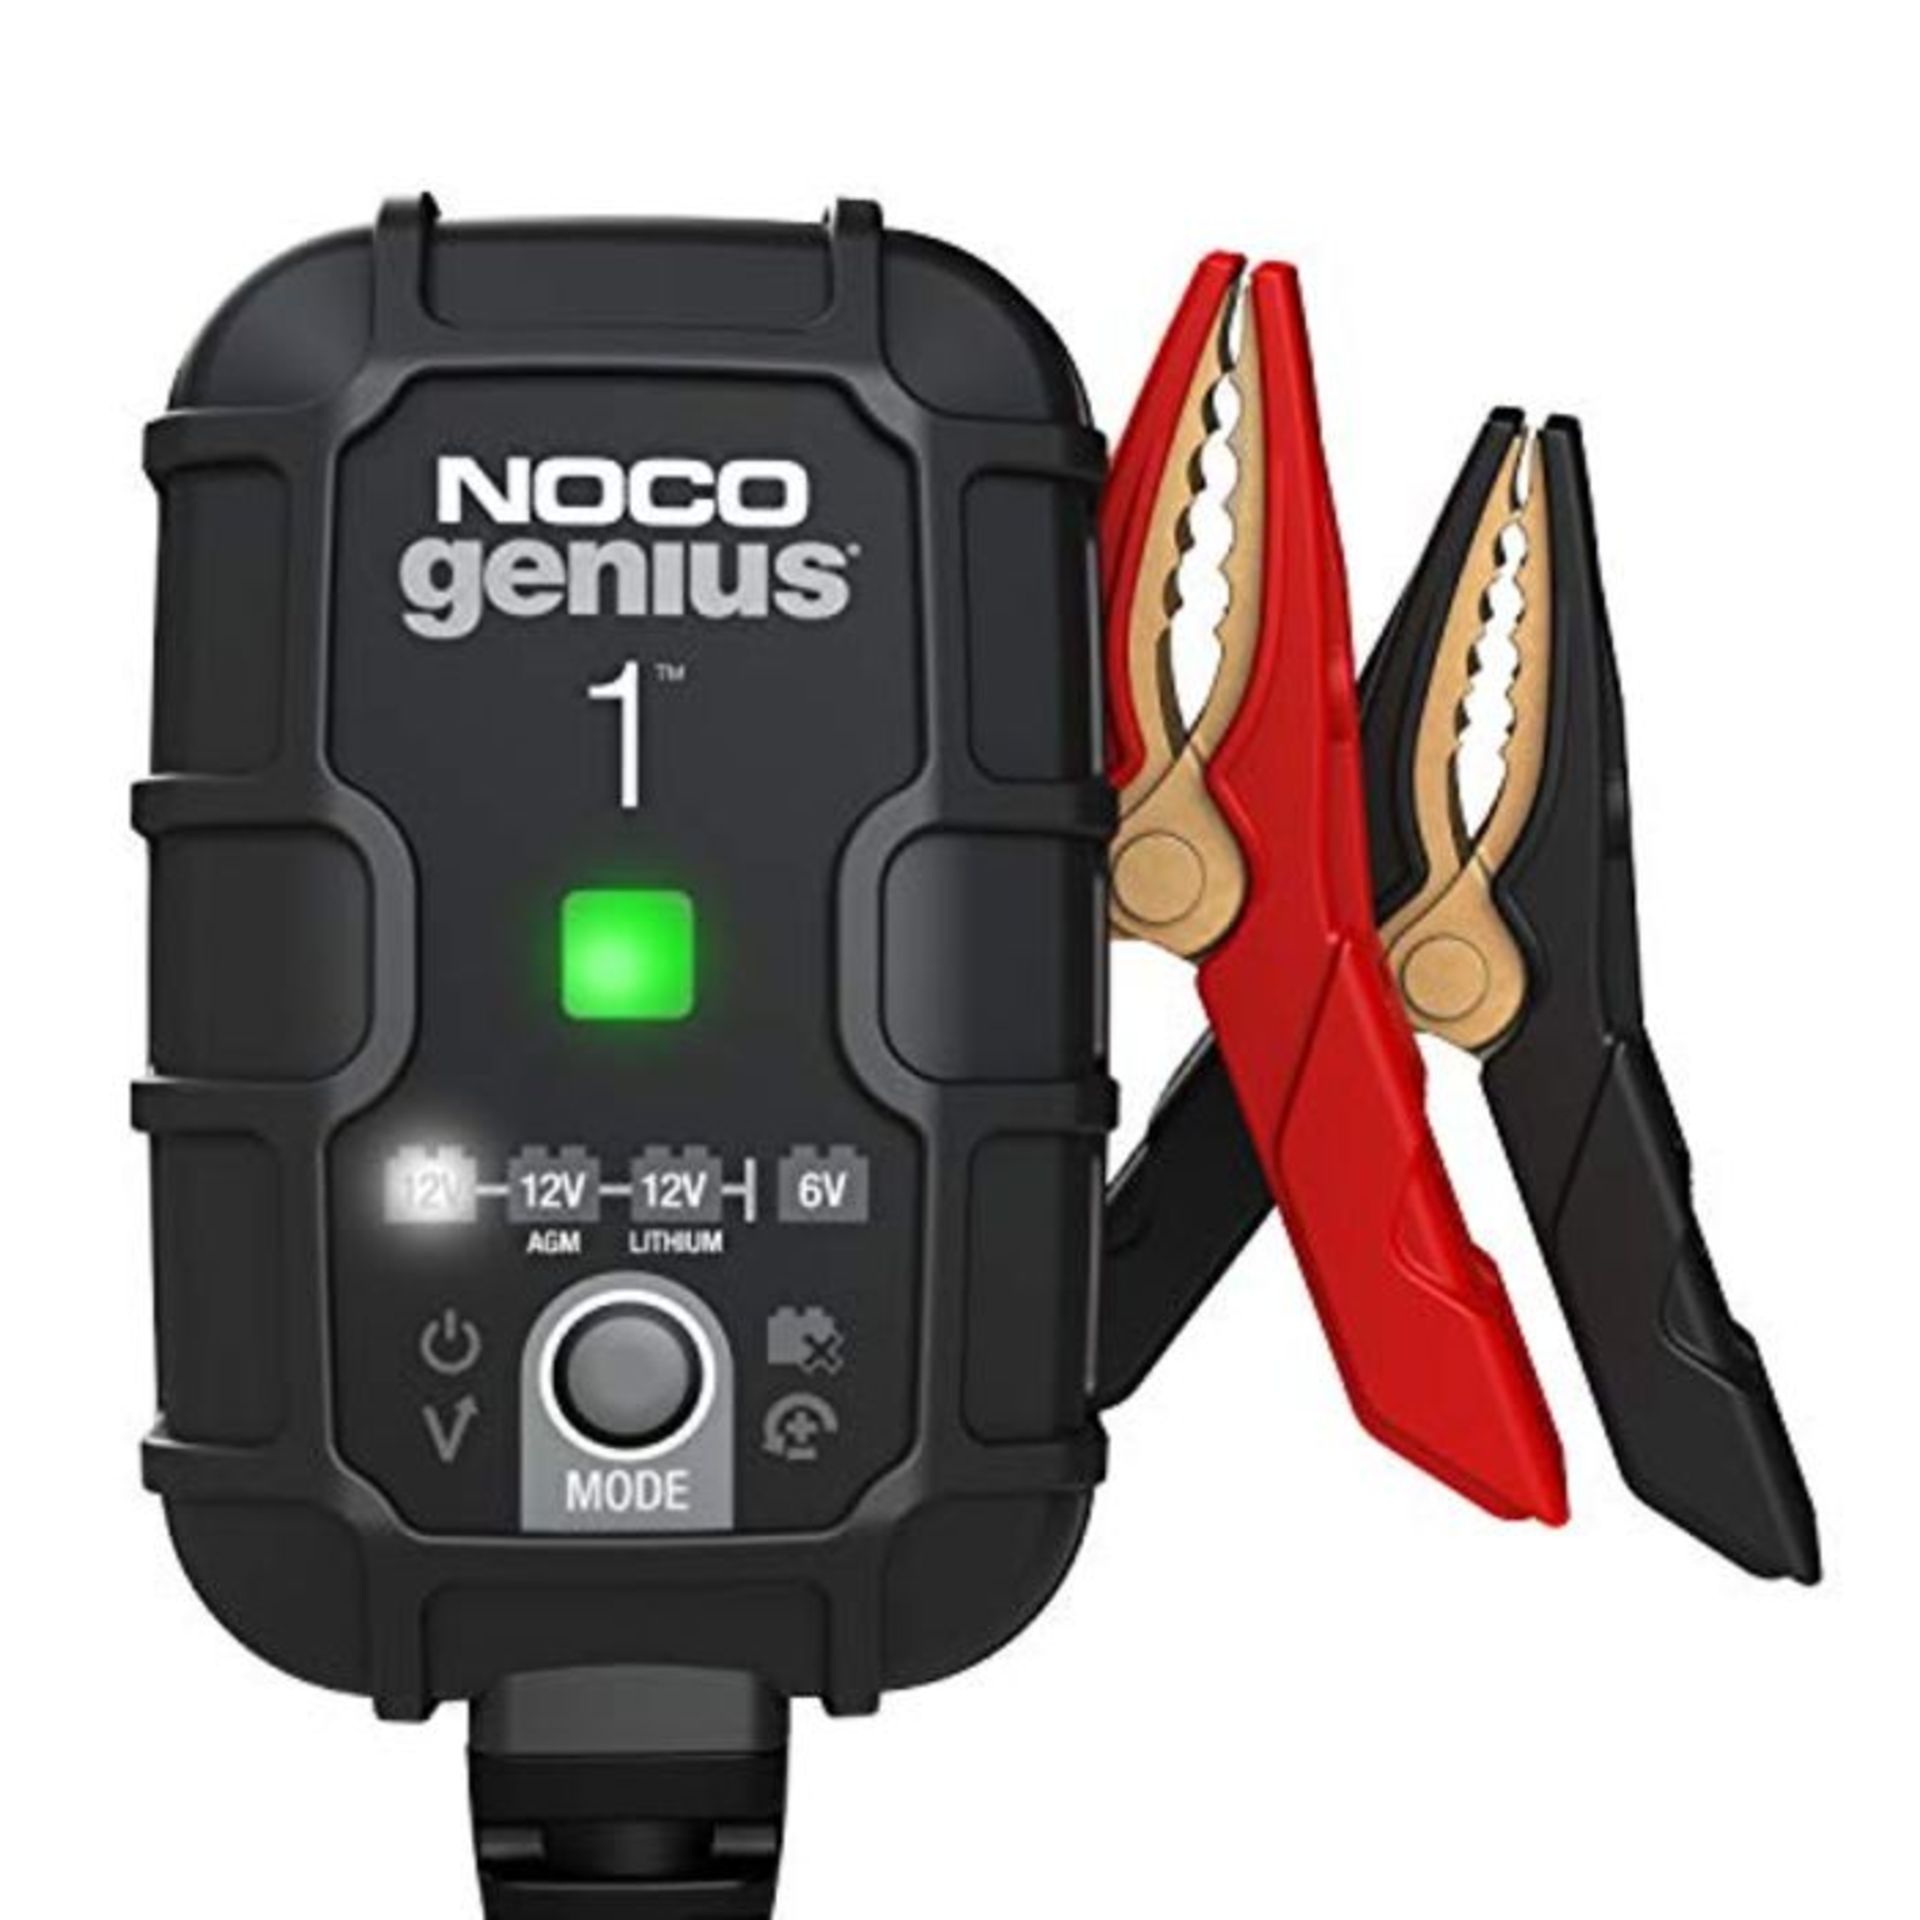 NOCO GENIUS1UK, 1-Amp Fully-Automatic Smart Charger, 6V And 12V Battery Charging Units